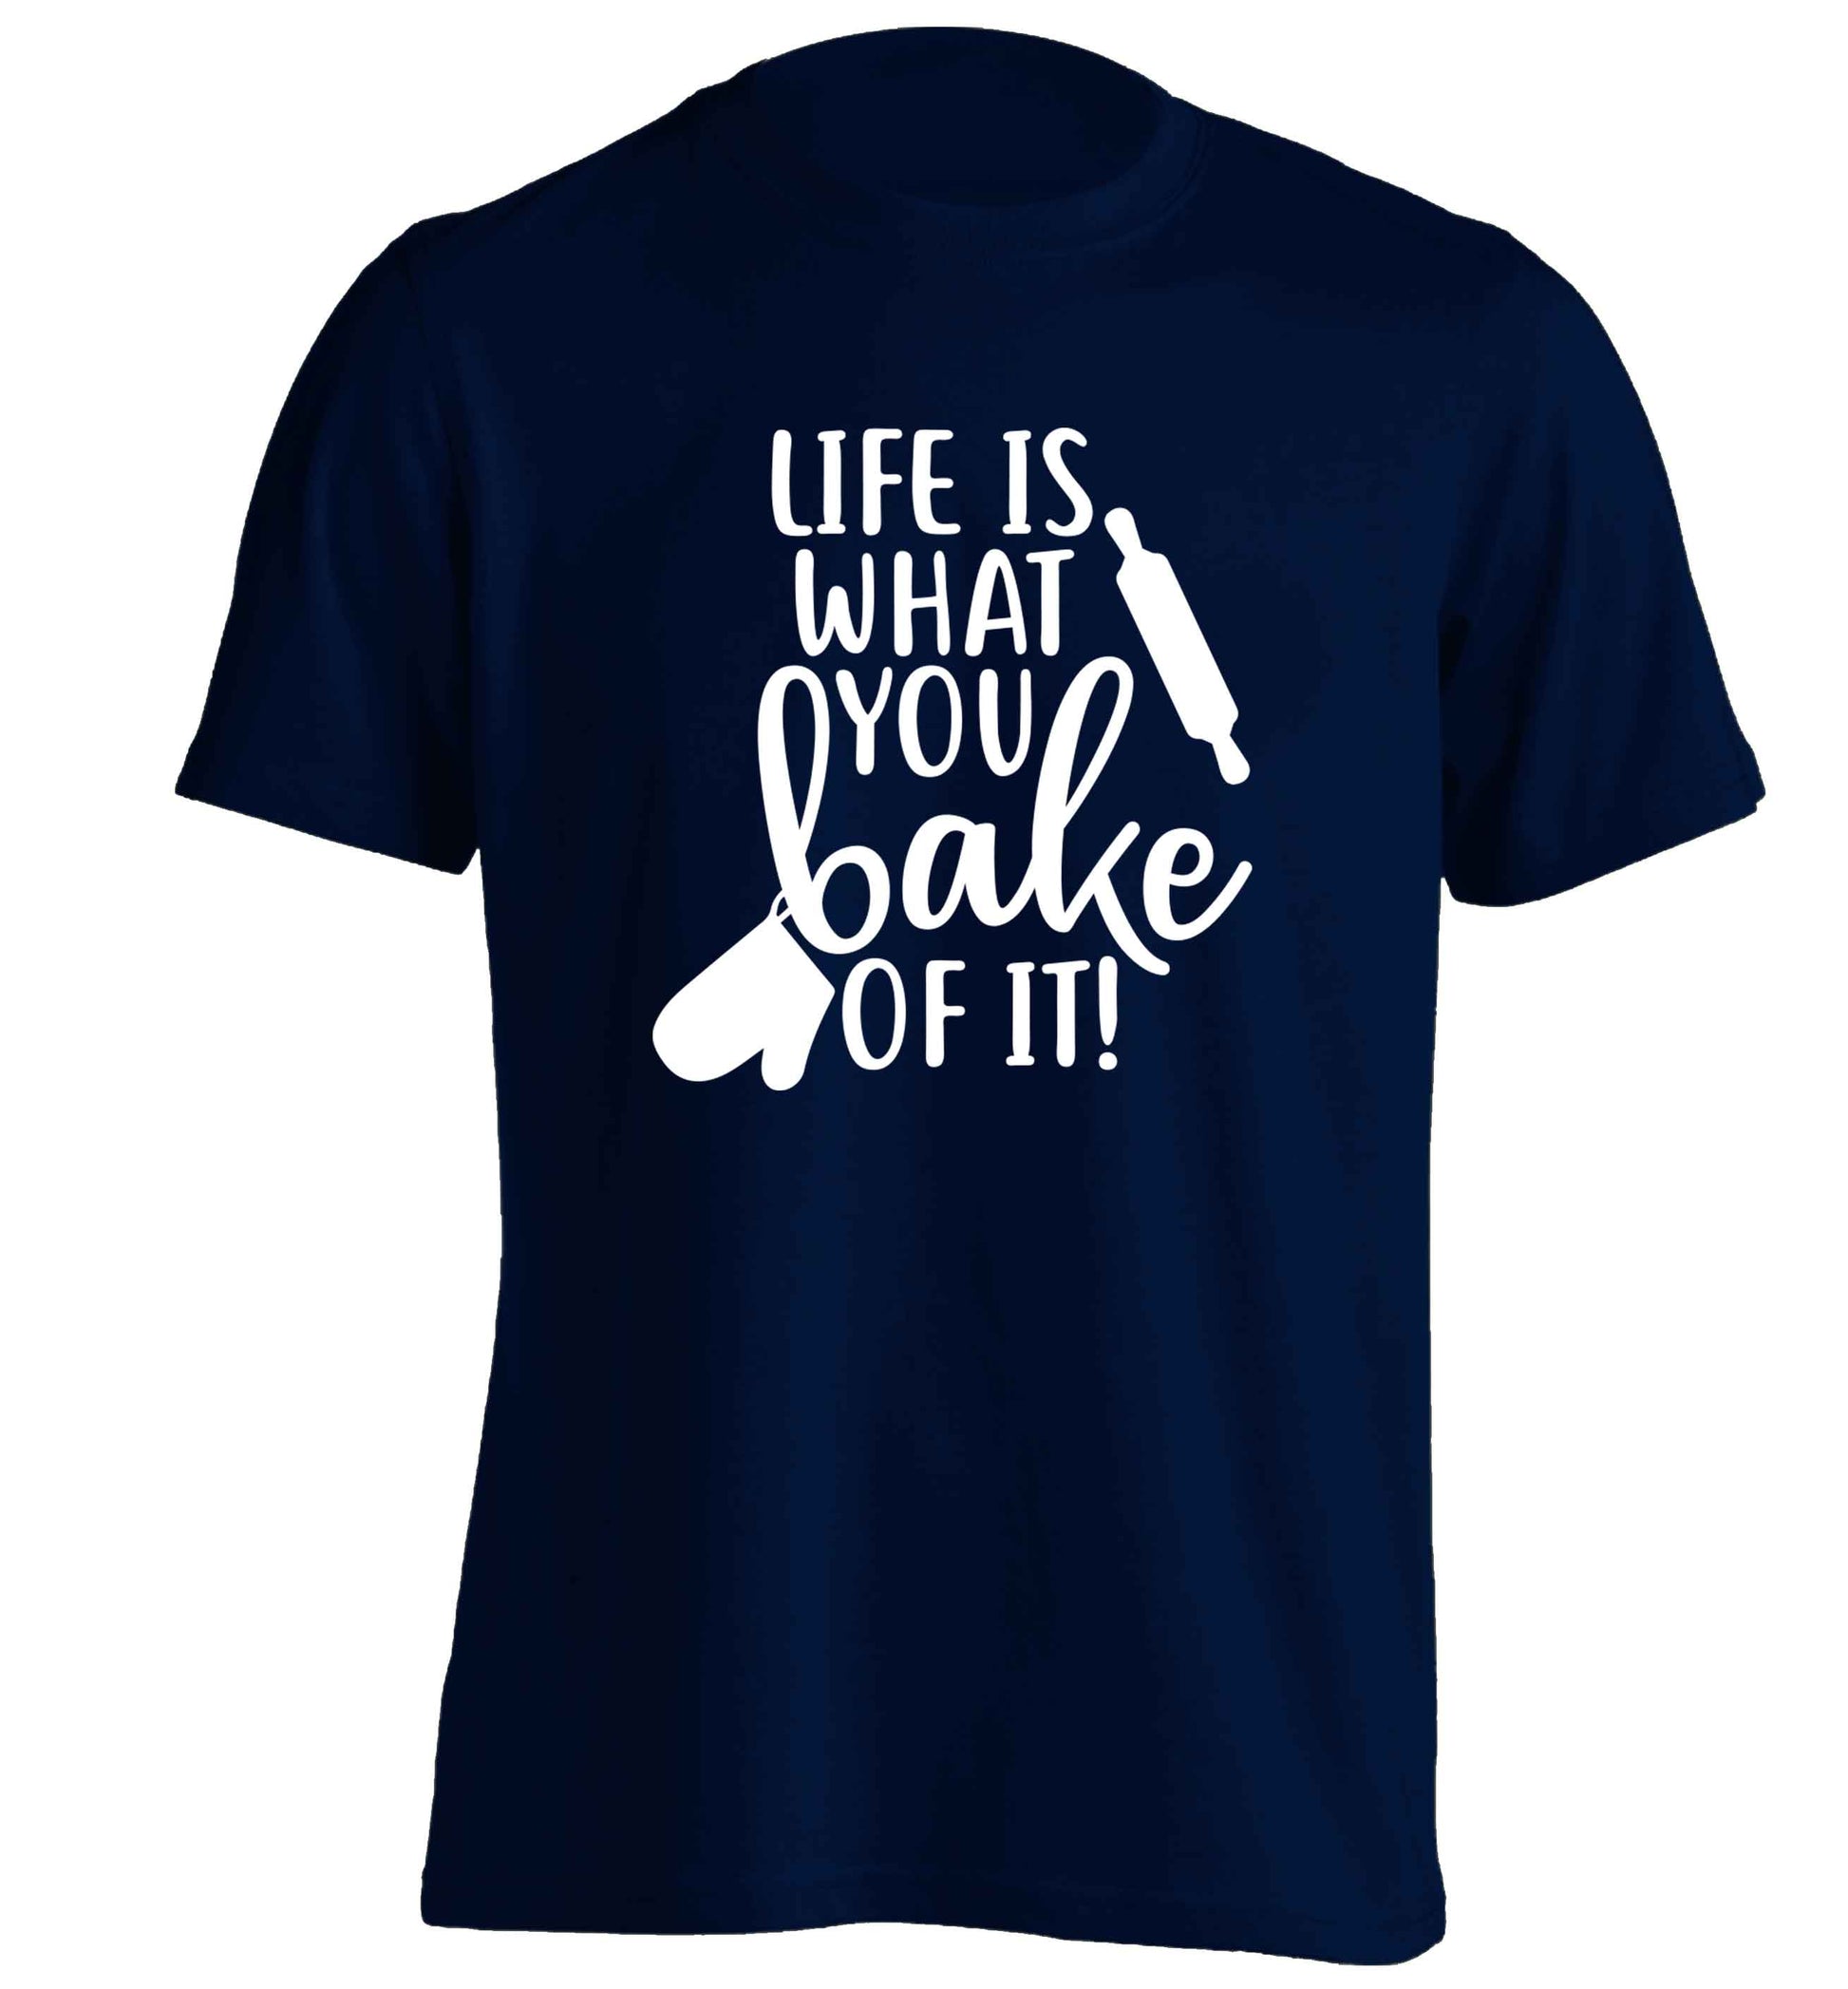 Life is what you bake of it adults unisex navy Tshirt 2XL